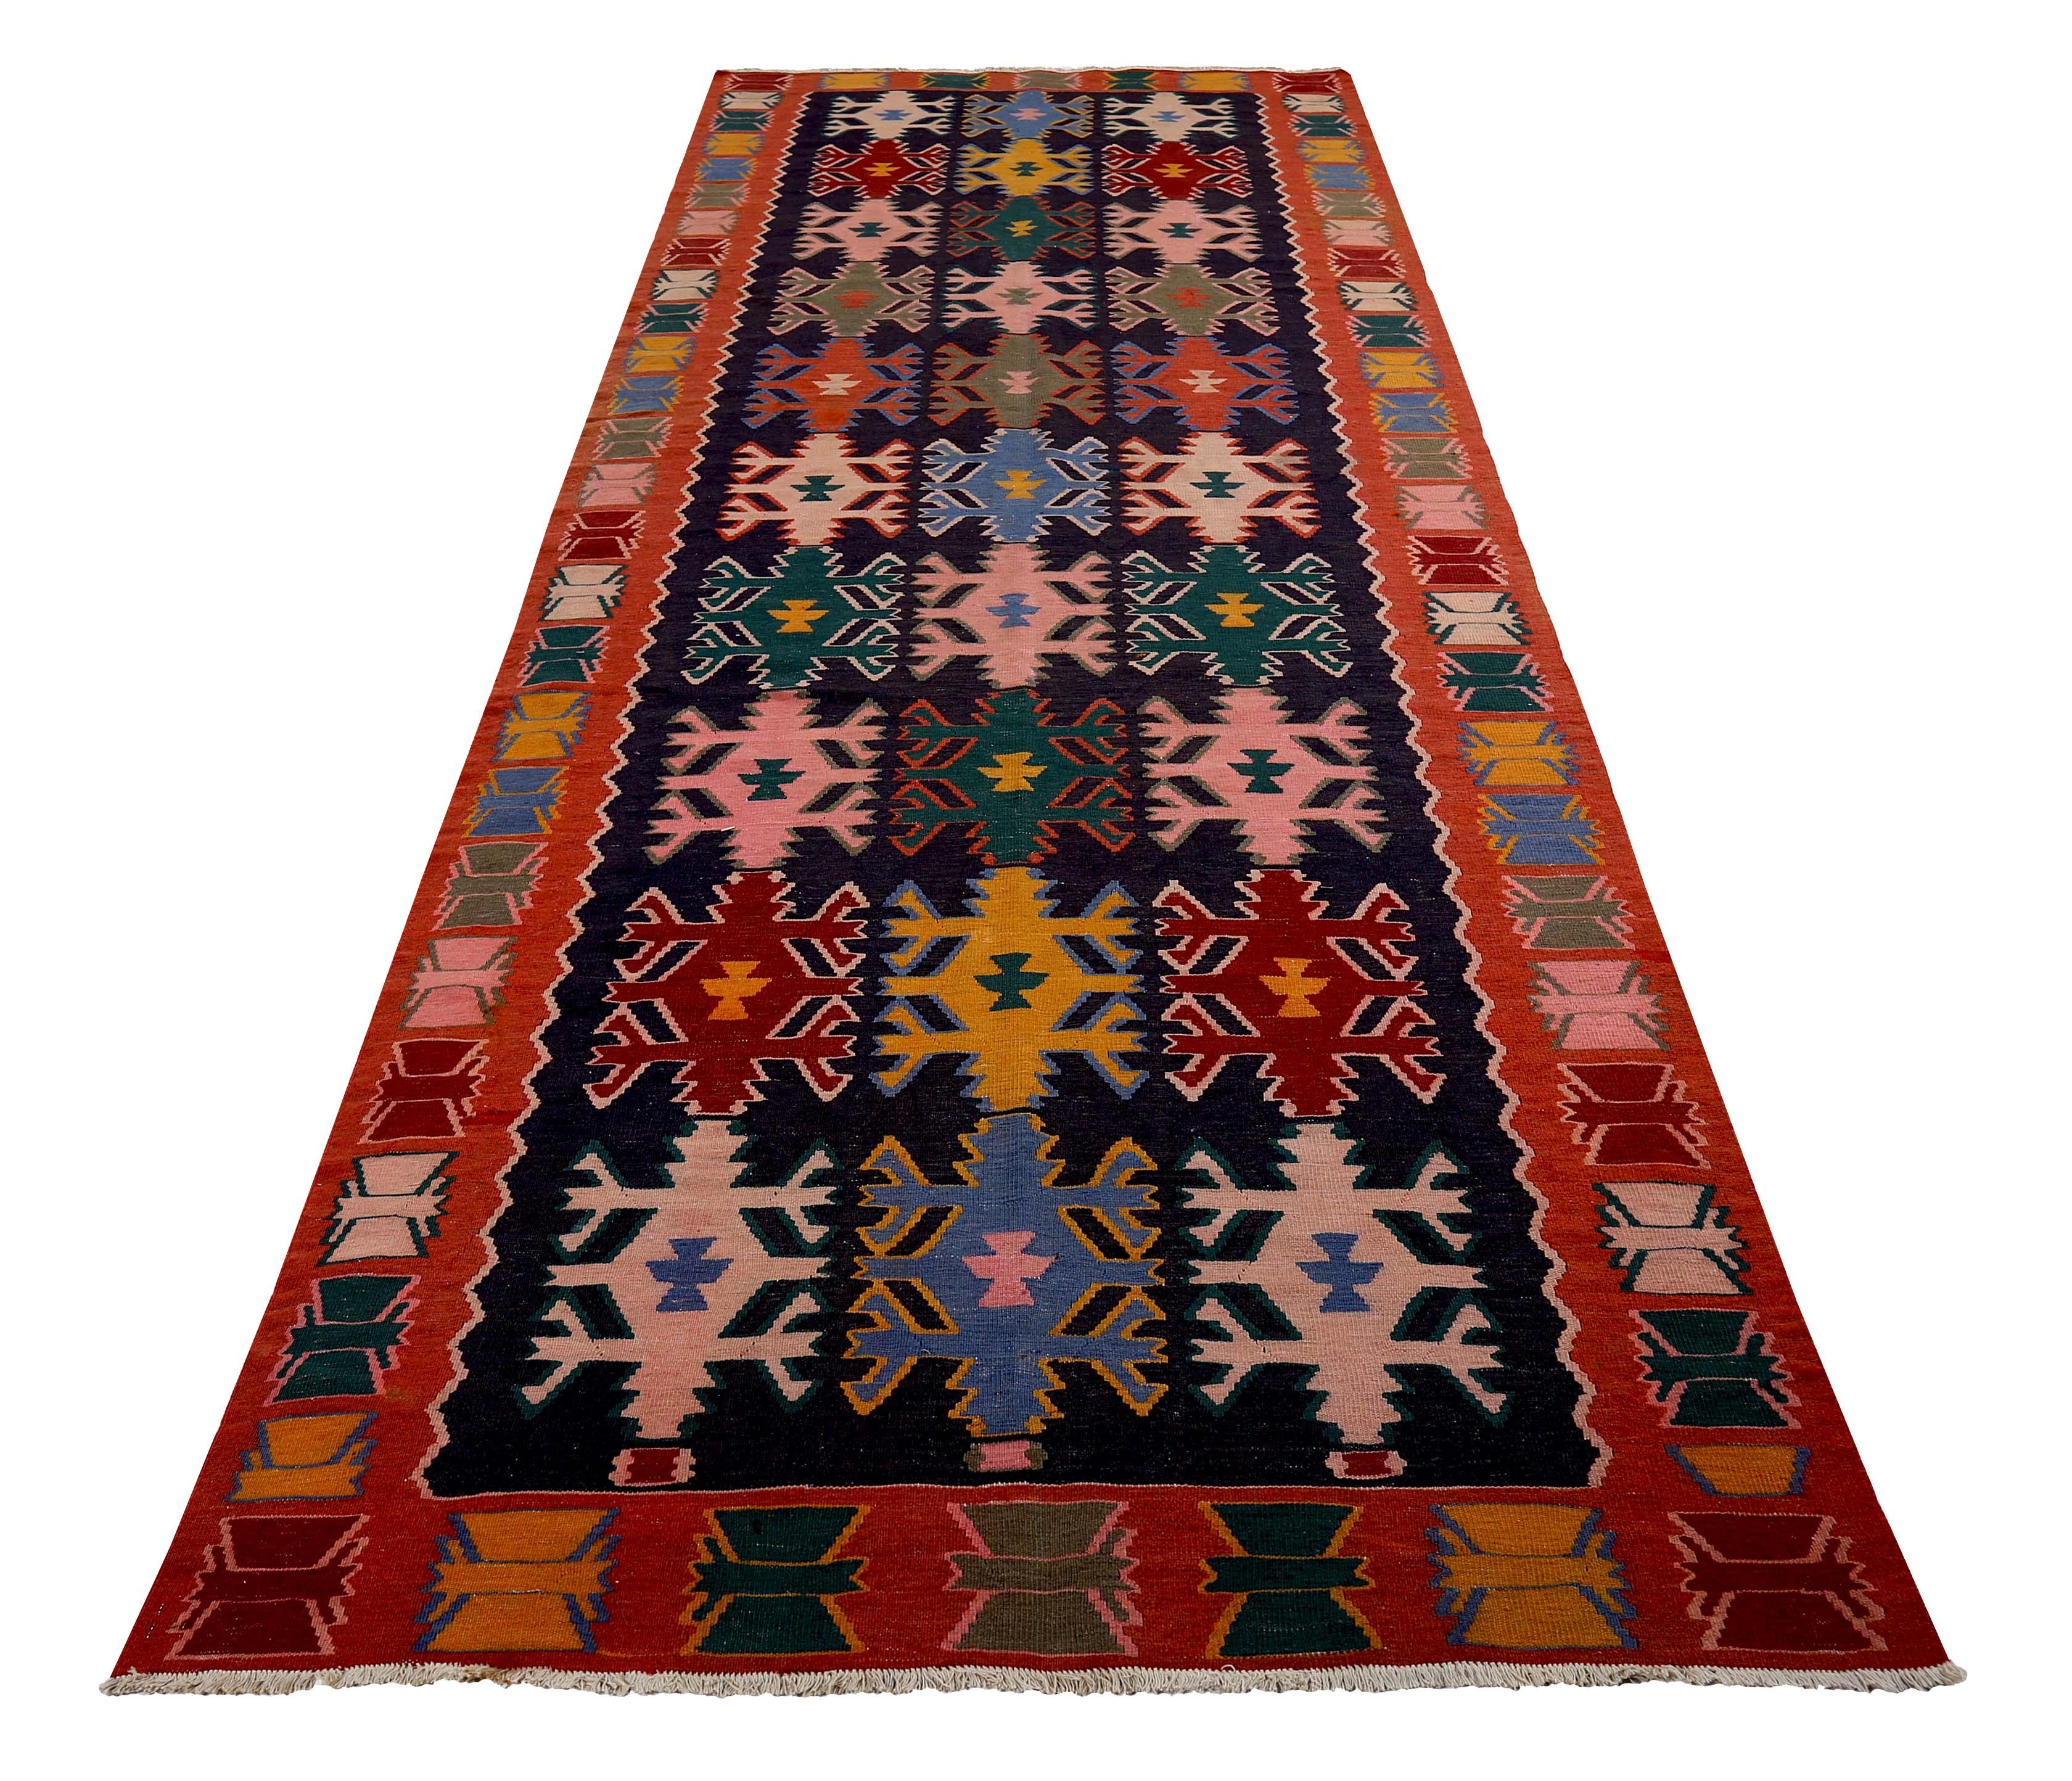 Turkish runner rug handwoven from the finest sheep’s wool and colored with all-natural vegetable dyes that are safe for humans and pets. It’s a traditional Kilim flat-weave design featuring green, blue, and pink tribal details. It’s a stunning piece